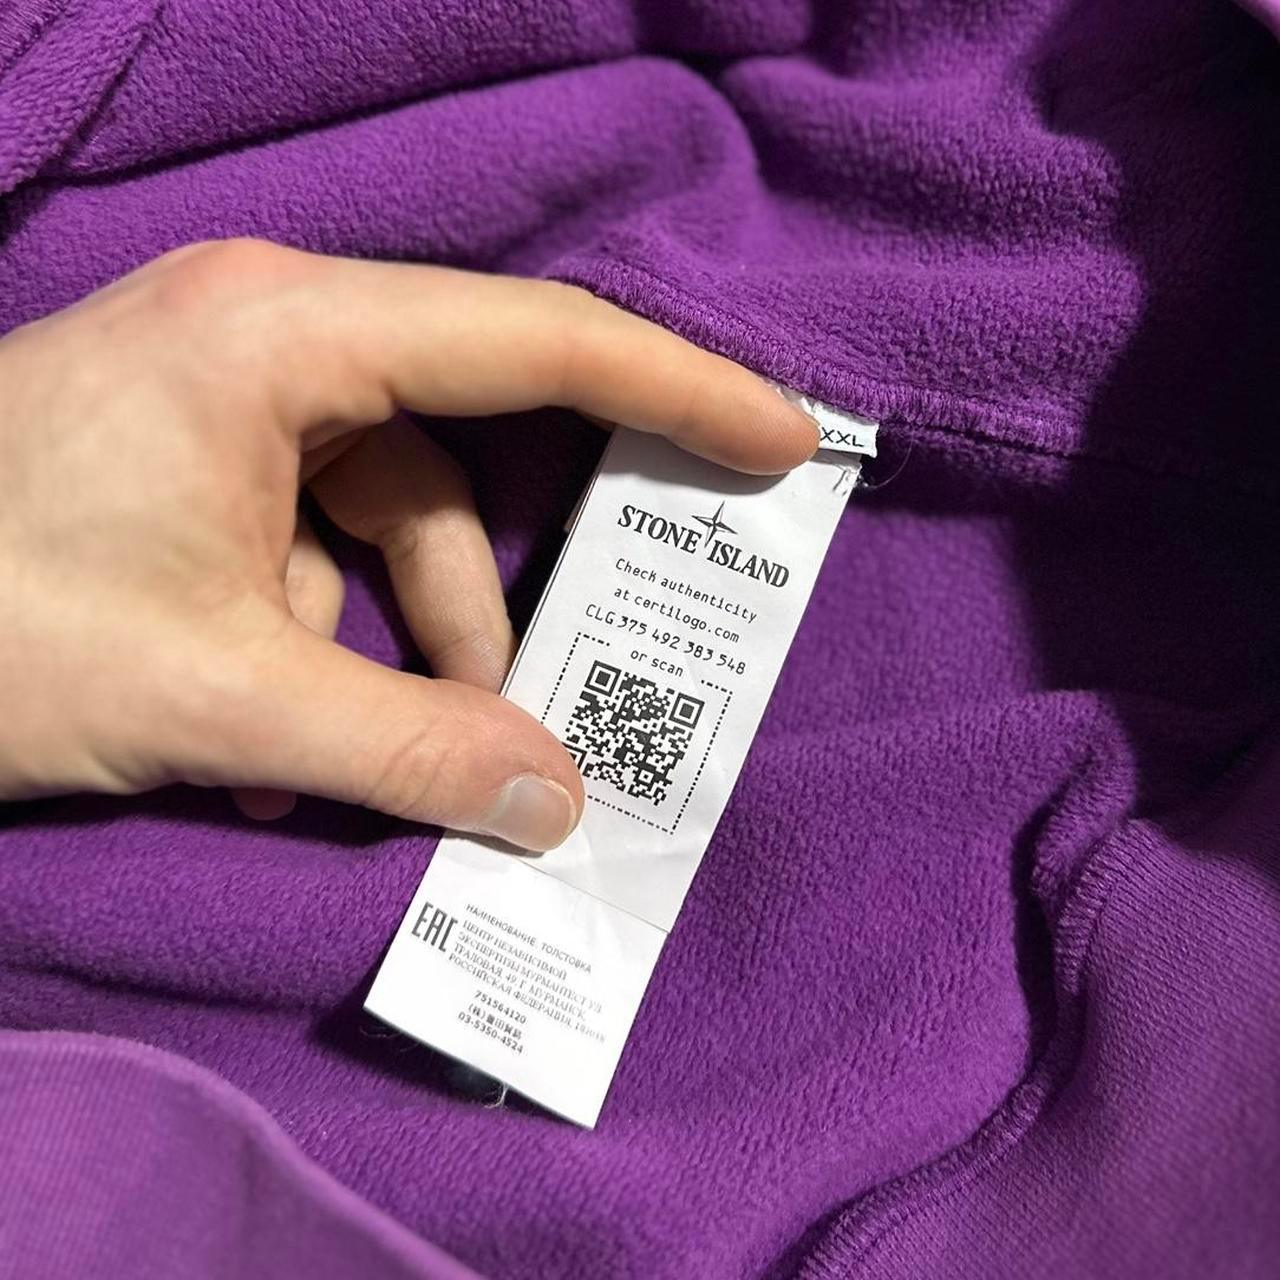 Stone Island Purple Pullover Hoodie - Known Source